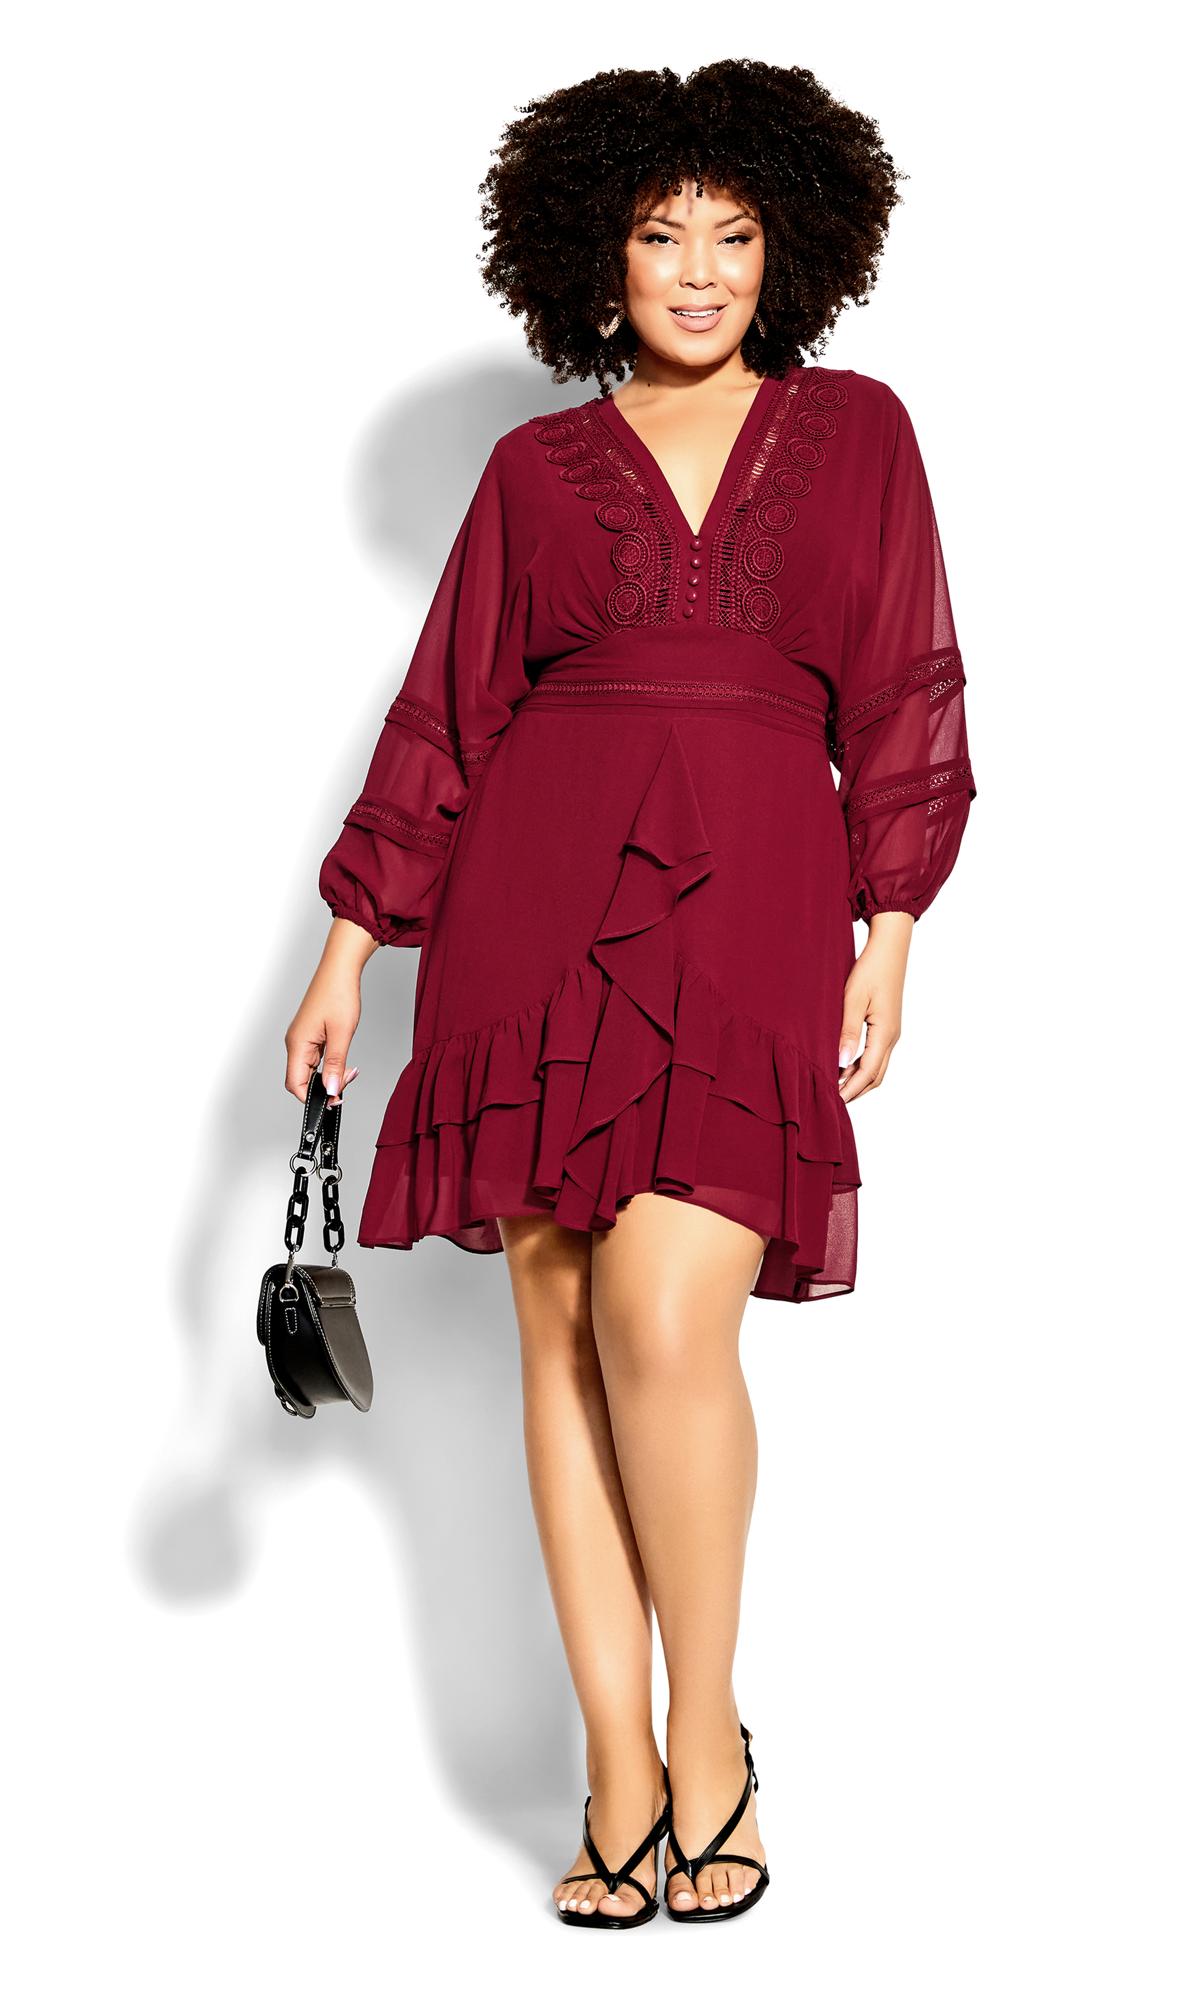 City Chic Red Sweetheart Dress 2